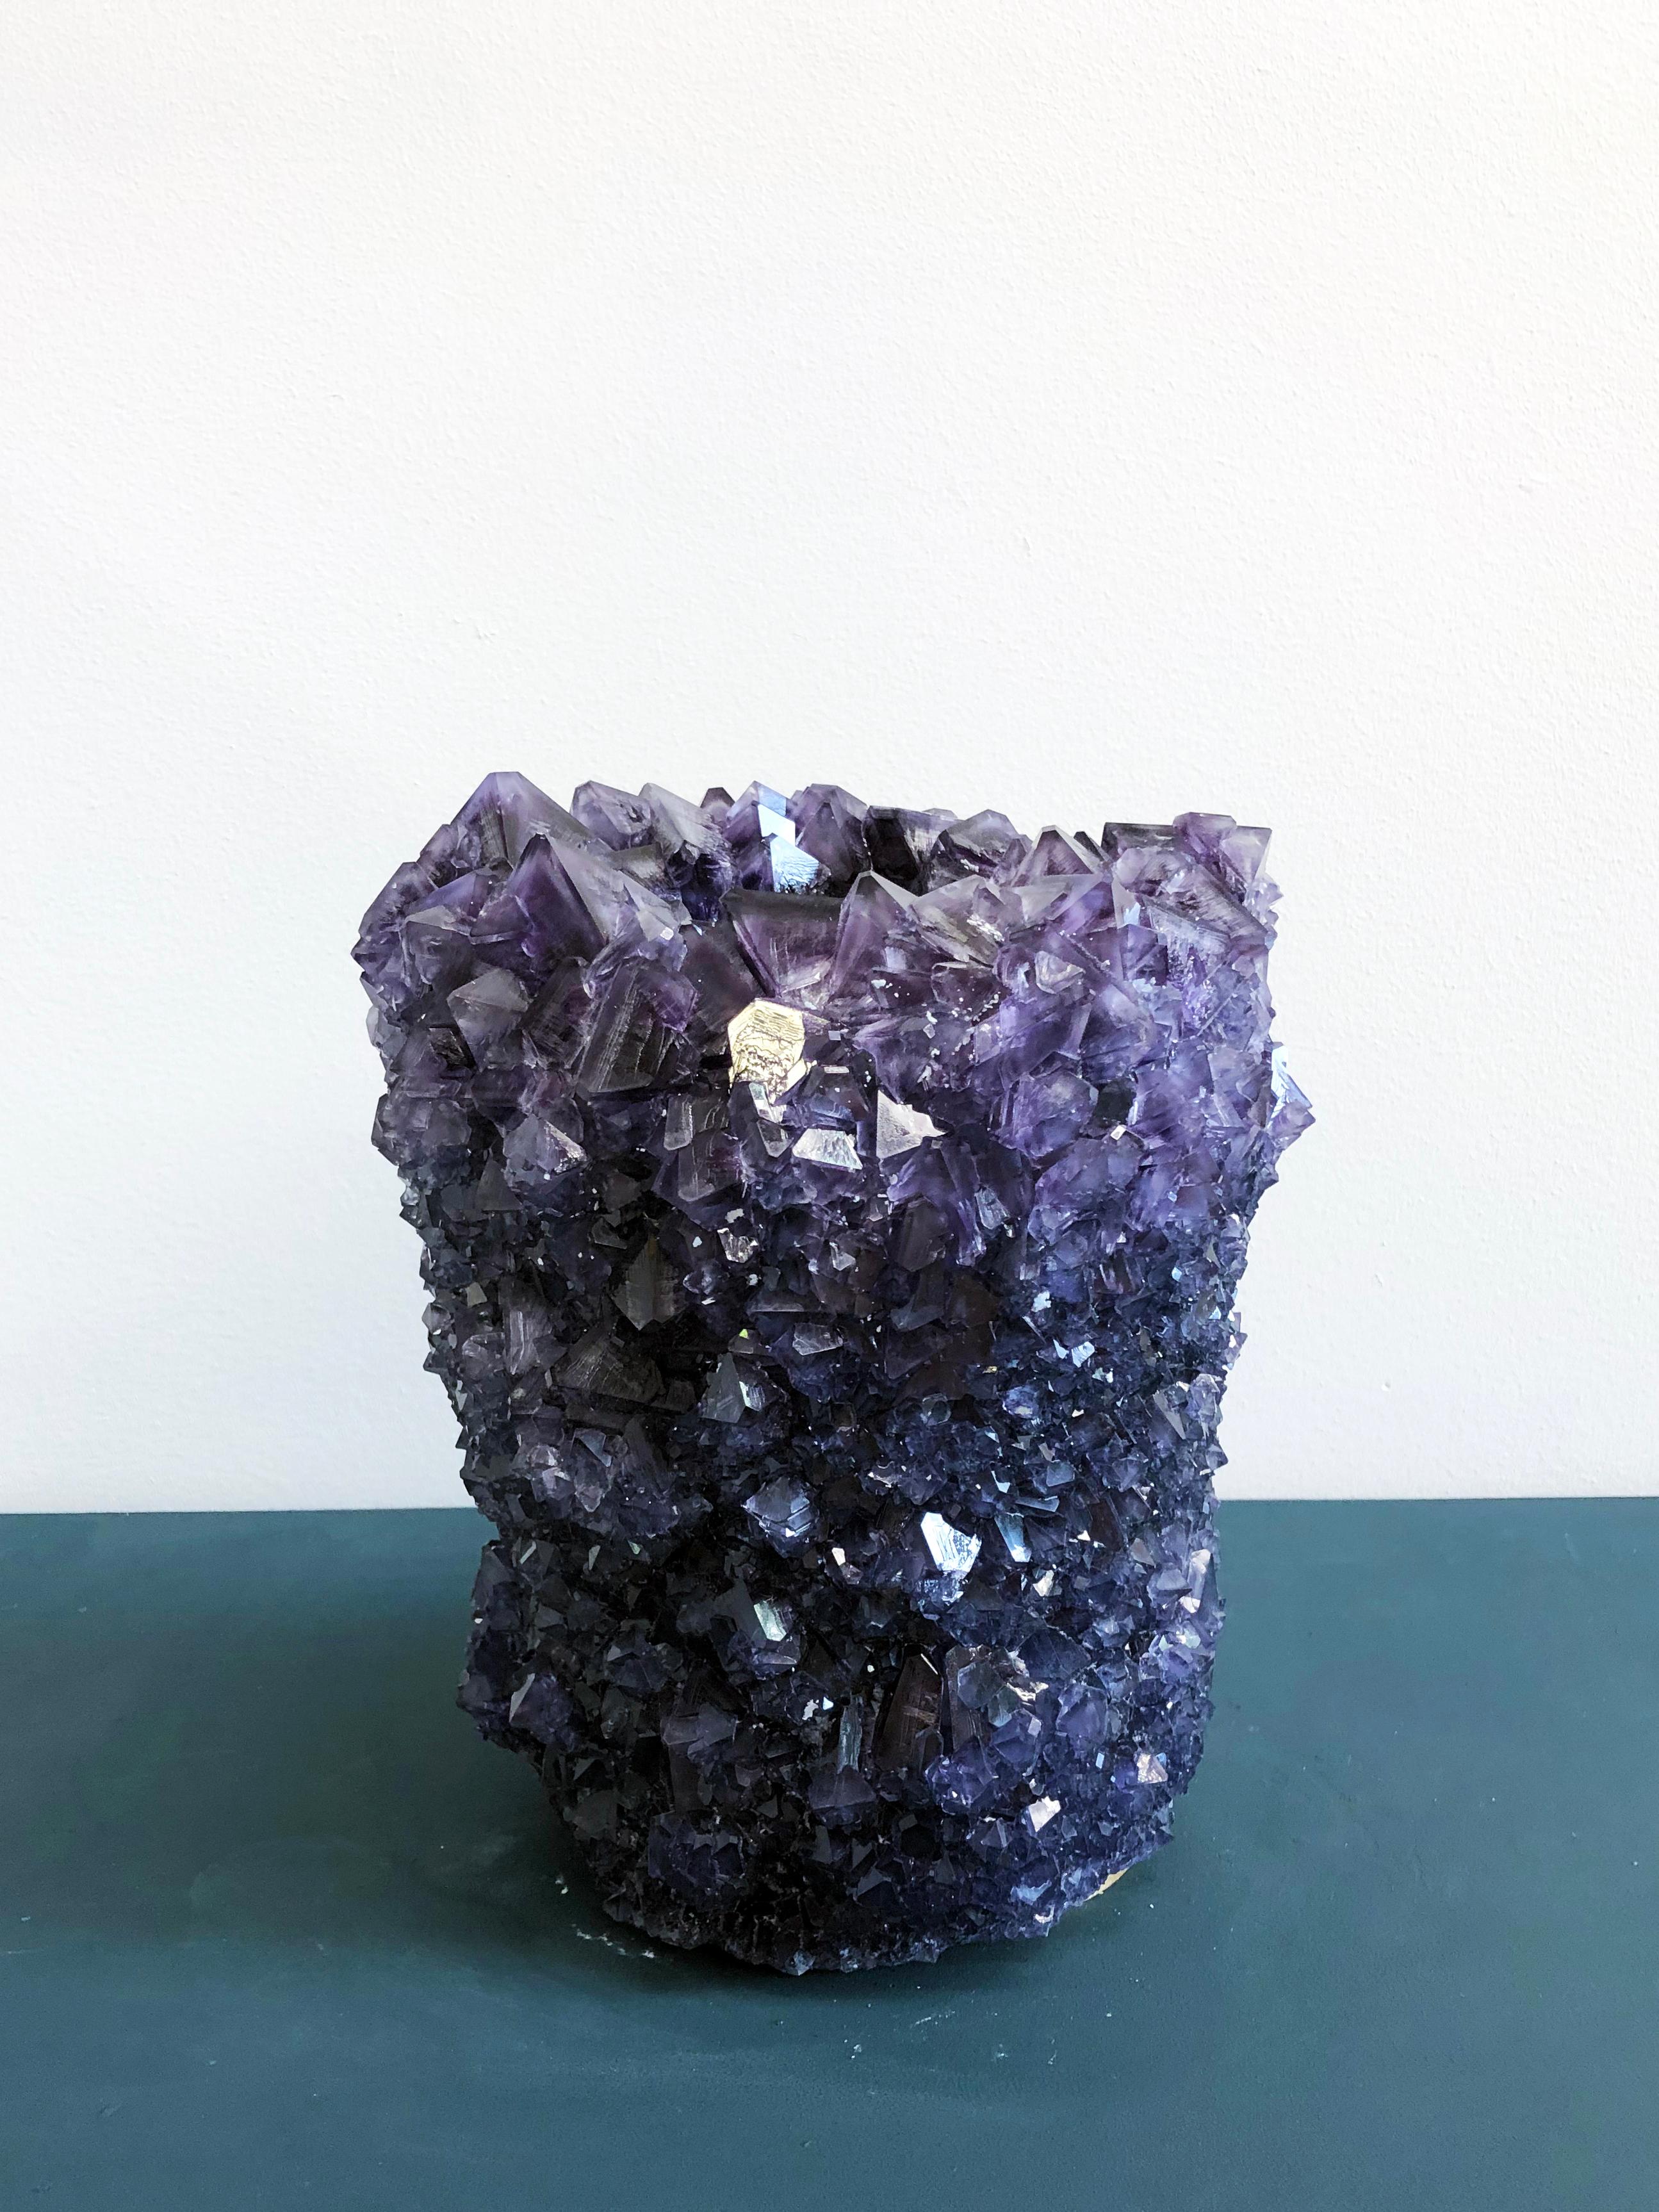 The ‘Crystal’ series is the result of research into stalagmites, one of the greatest wonders of nature. The growing process of the objects can be seen as a metaphor for time. Each object is unique in shape, color and texture, due to the organic